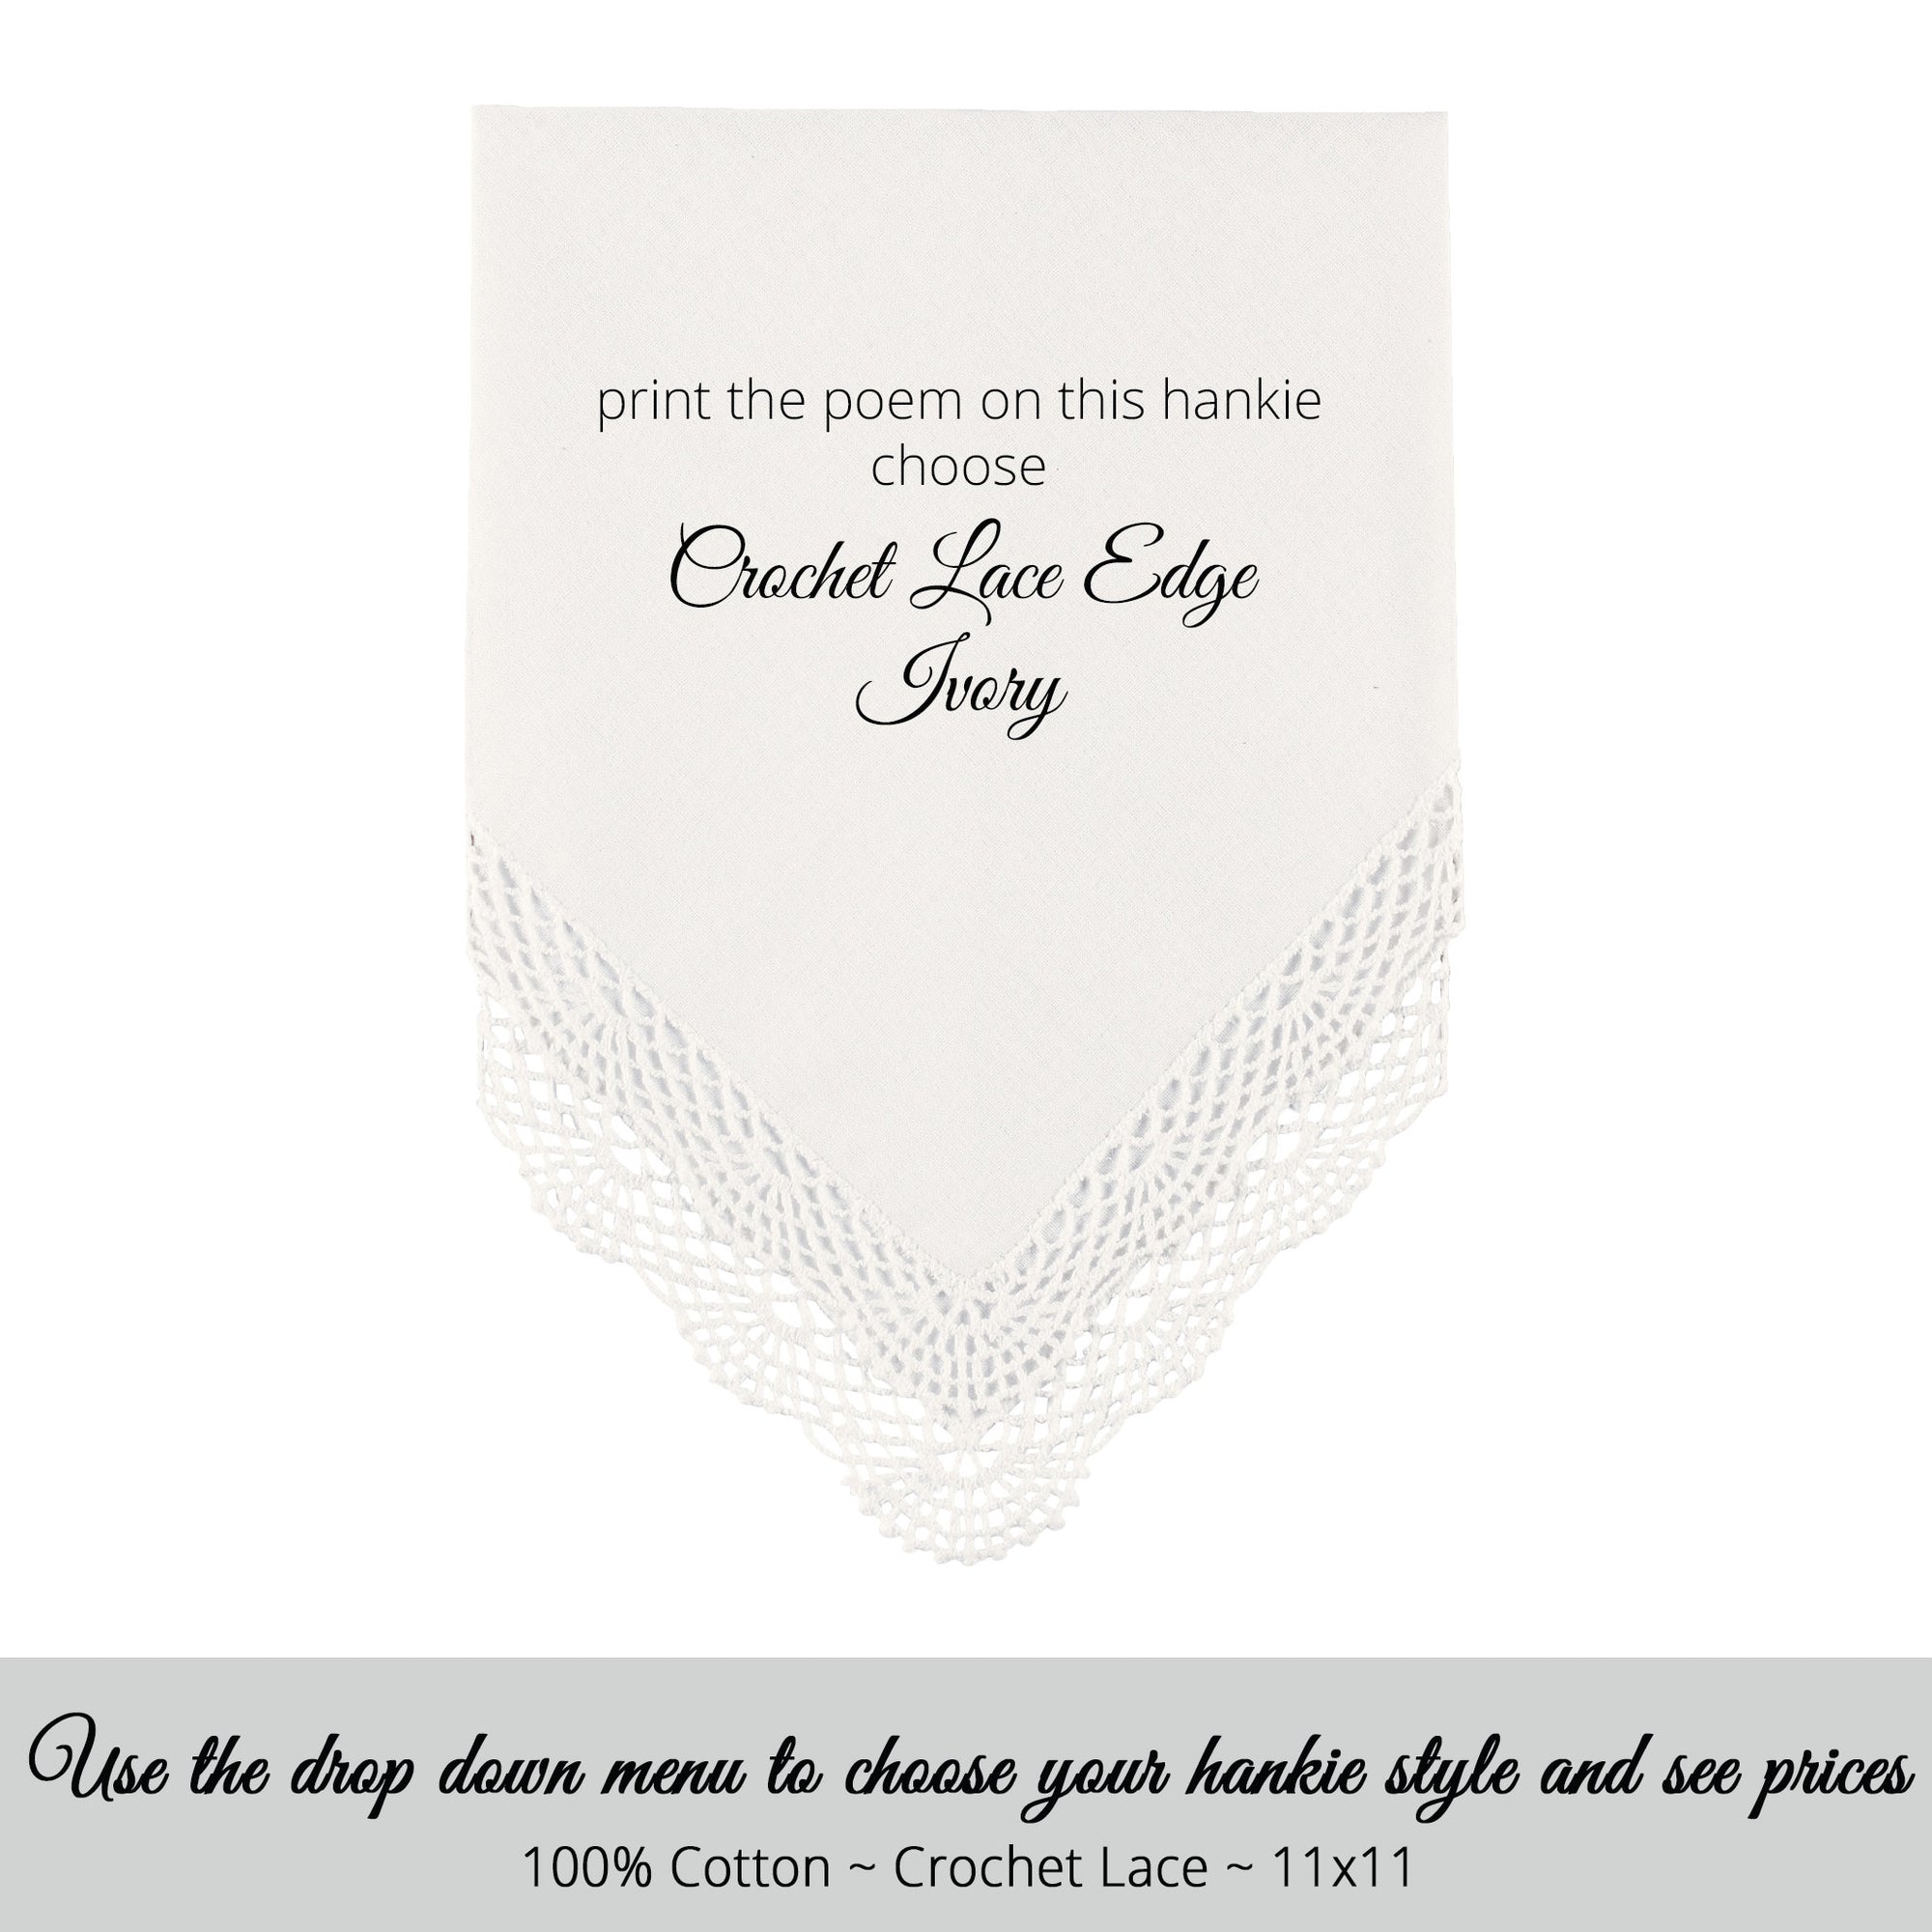 Wedding handkerchief ivory with crochet lace edge for the parents of the groom